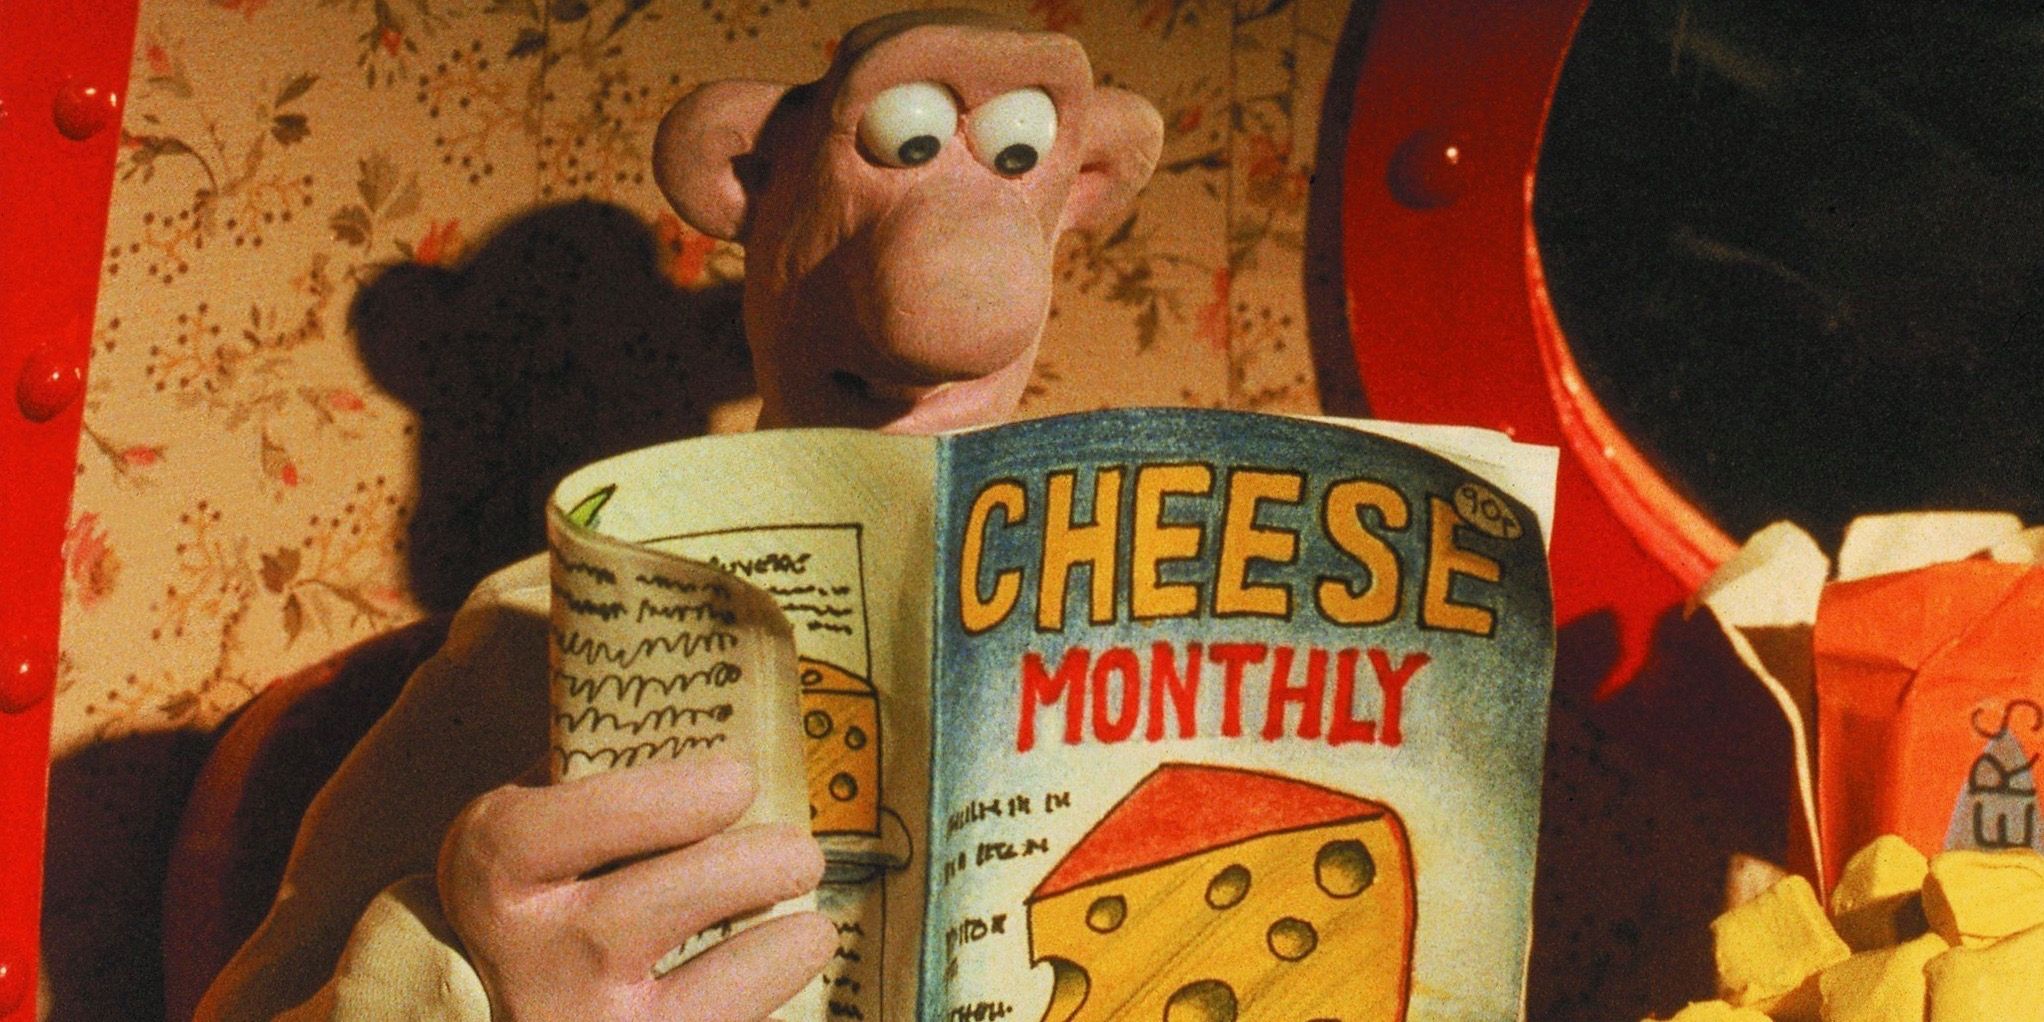 Wallace and Gromit A Grand Day Out Cheese Weekly